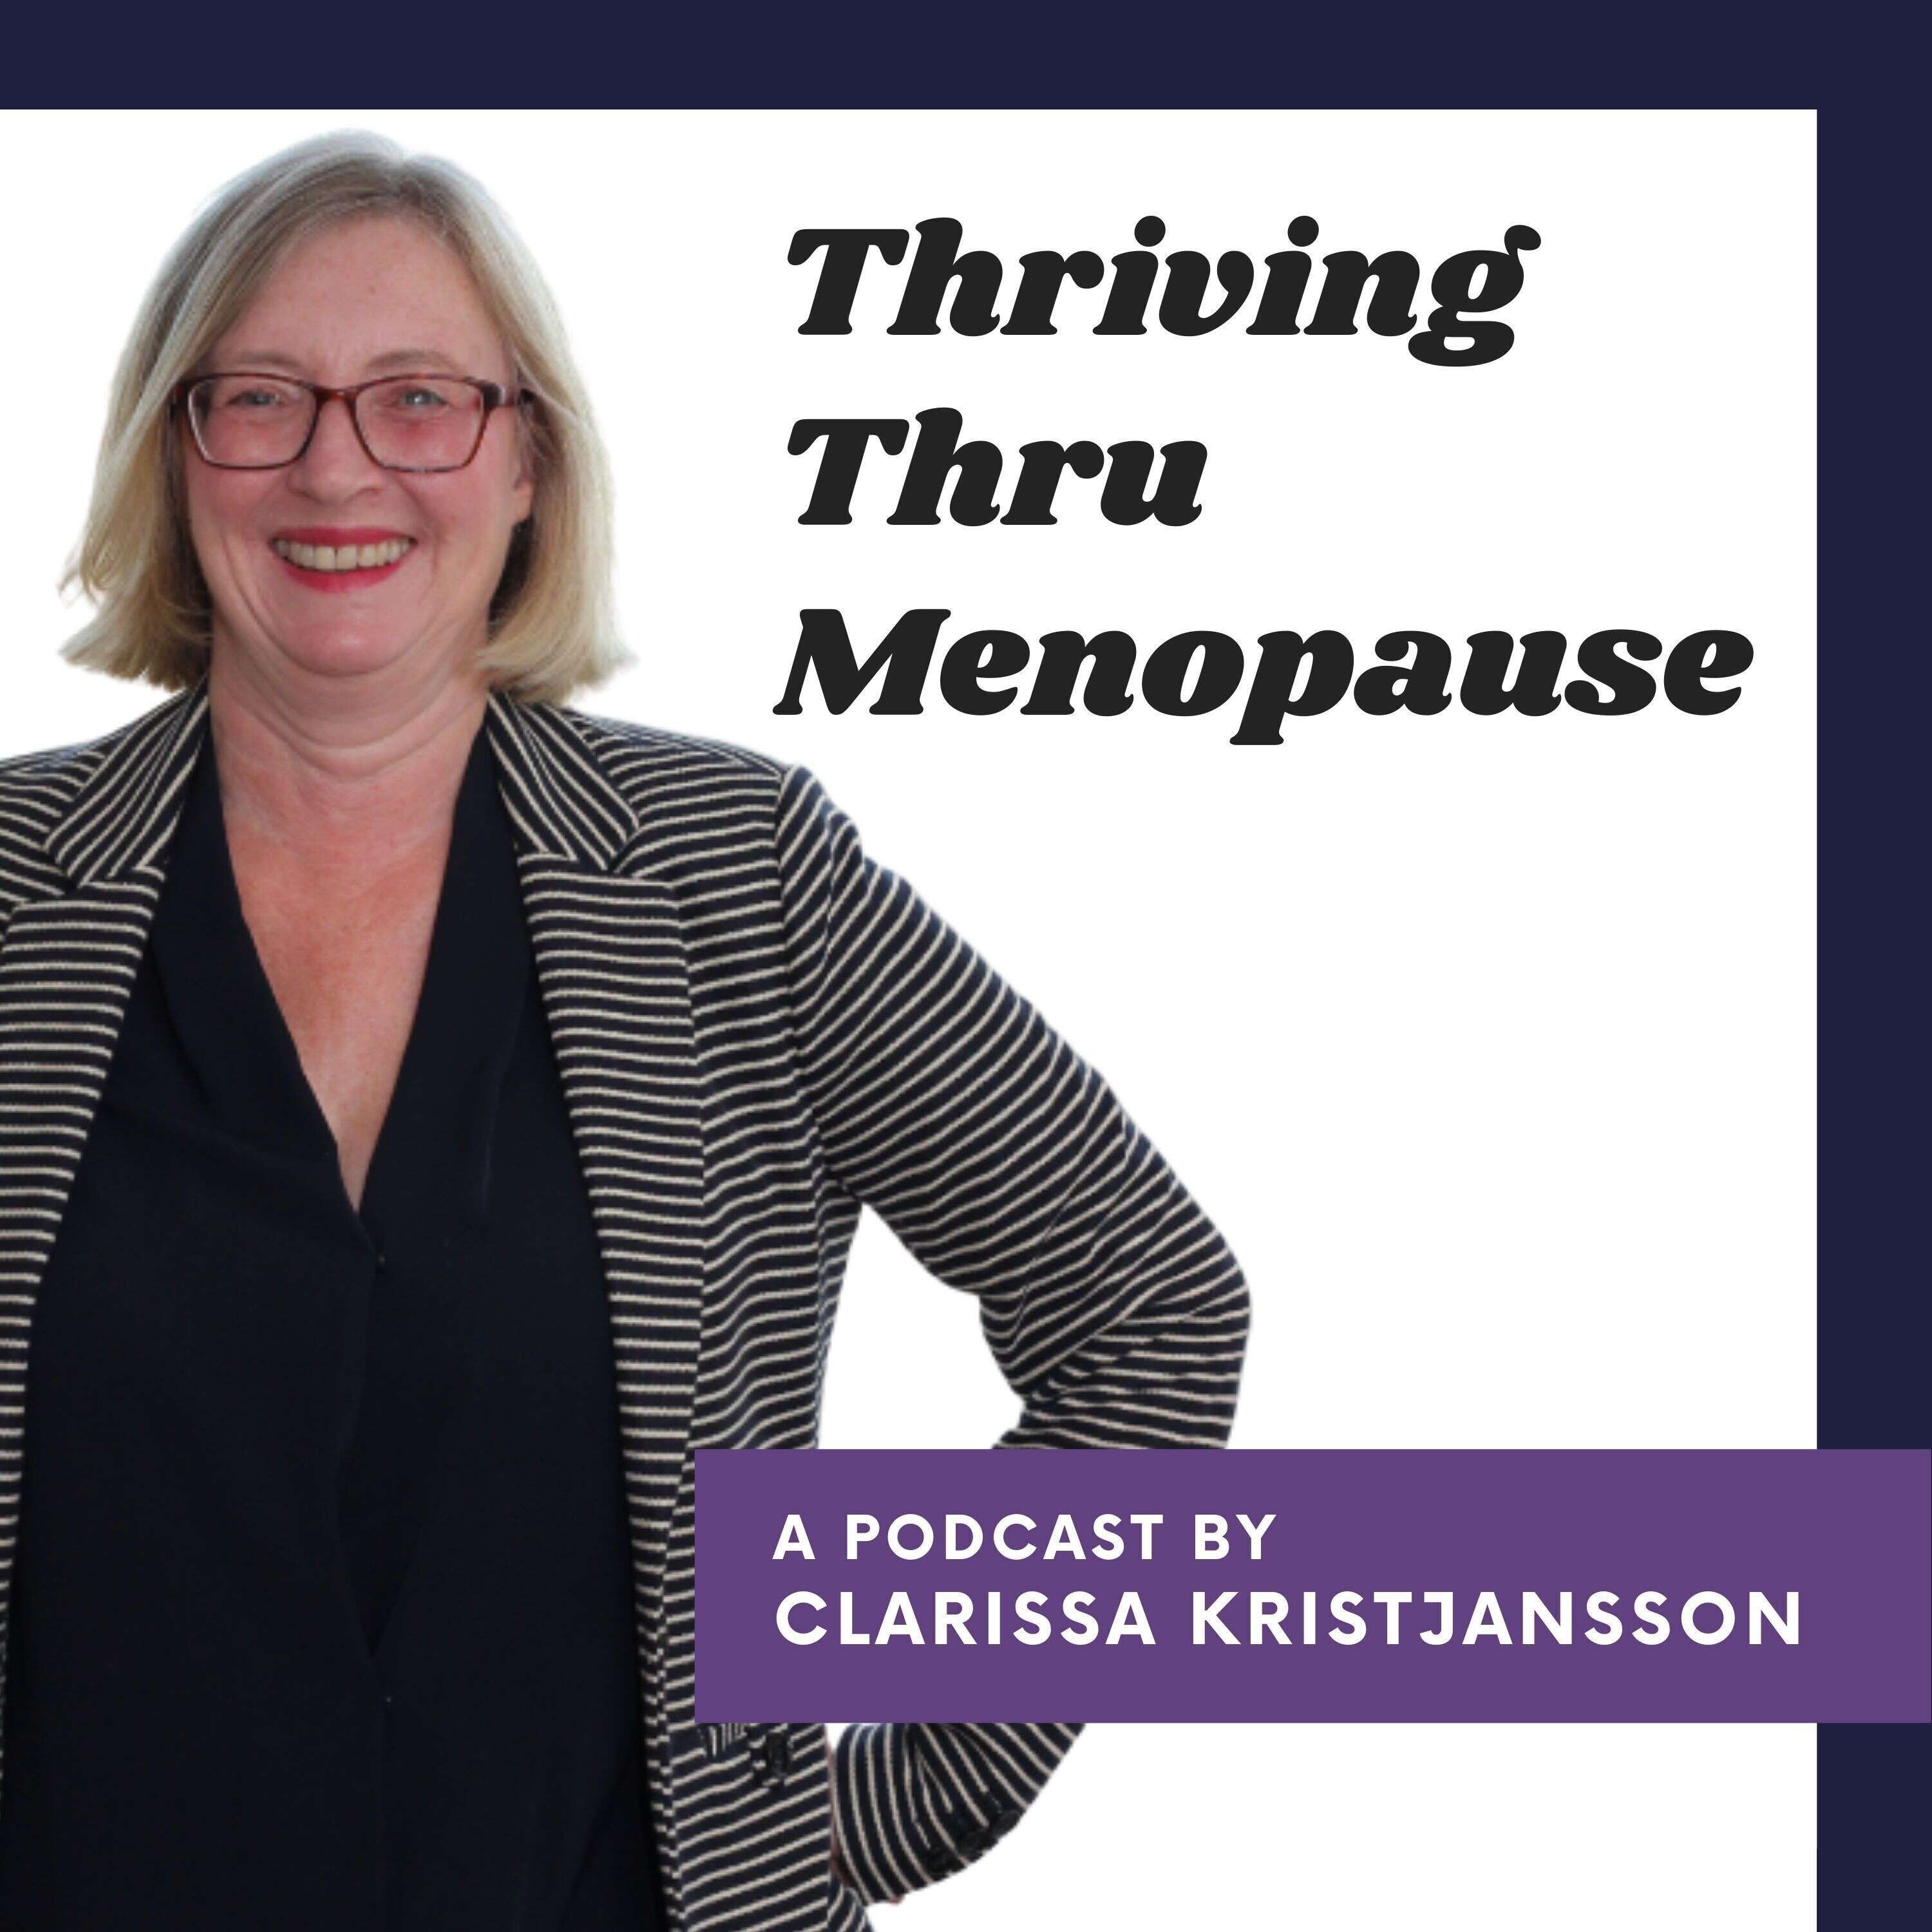 S2E45. How Culture Shapes How We View Women